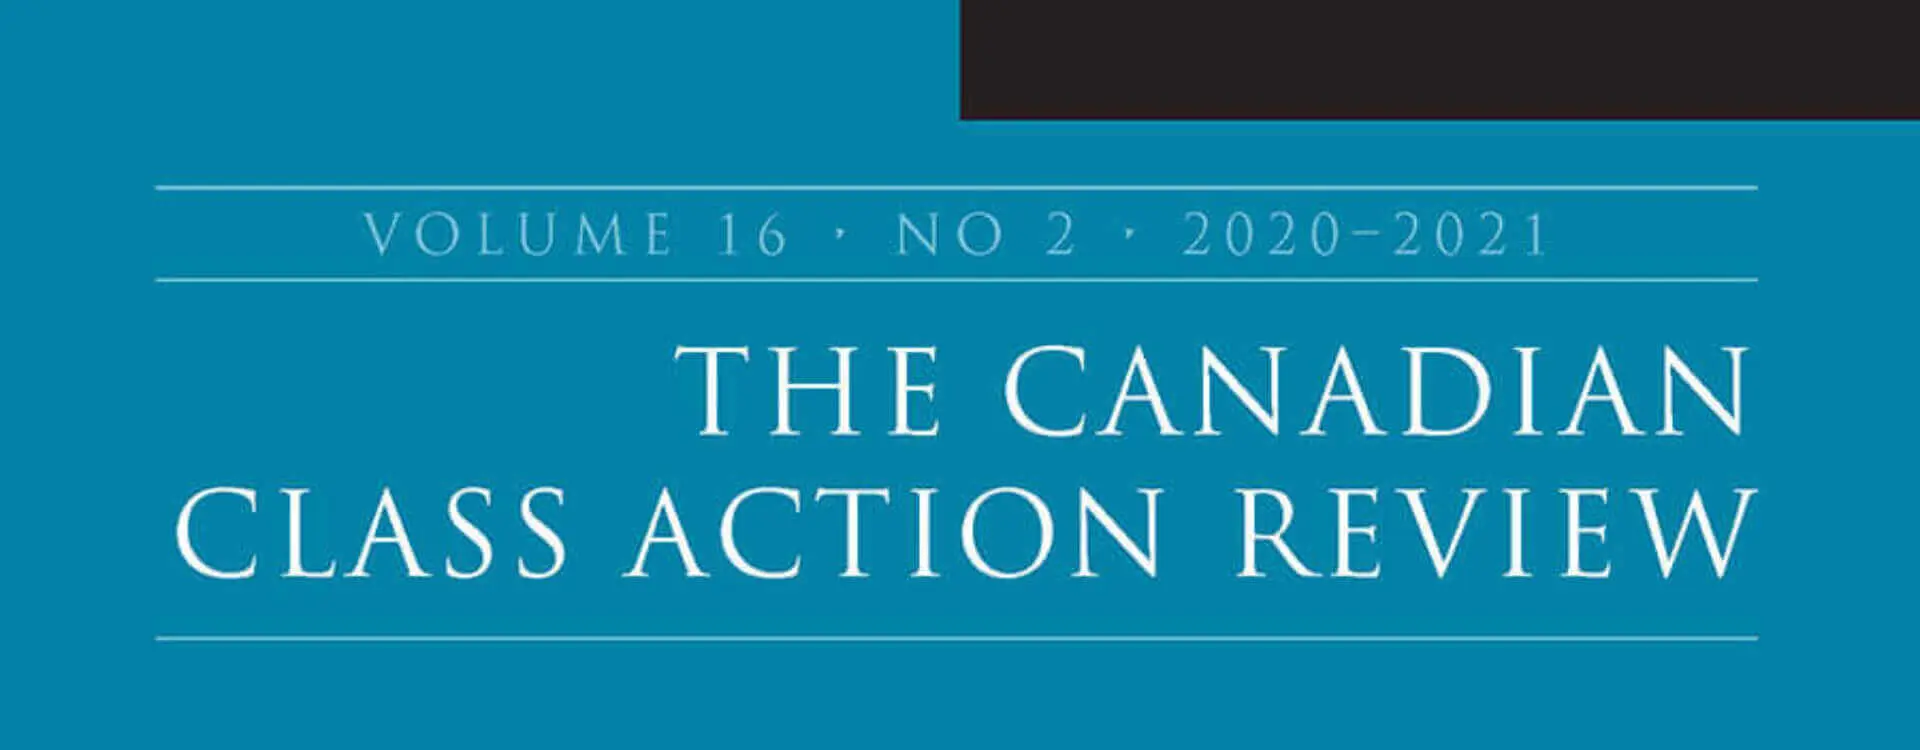 An overview of The Canadian Class Action Review, Volume 16 No. 2 2020-2021